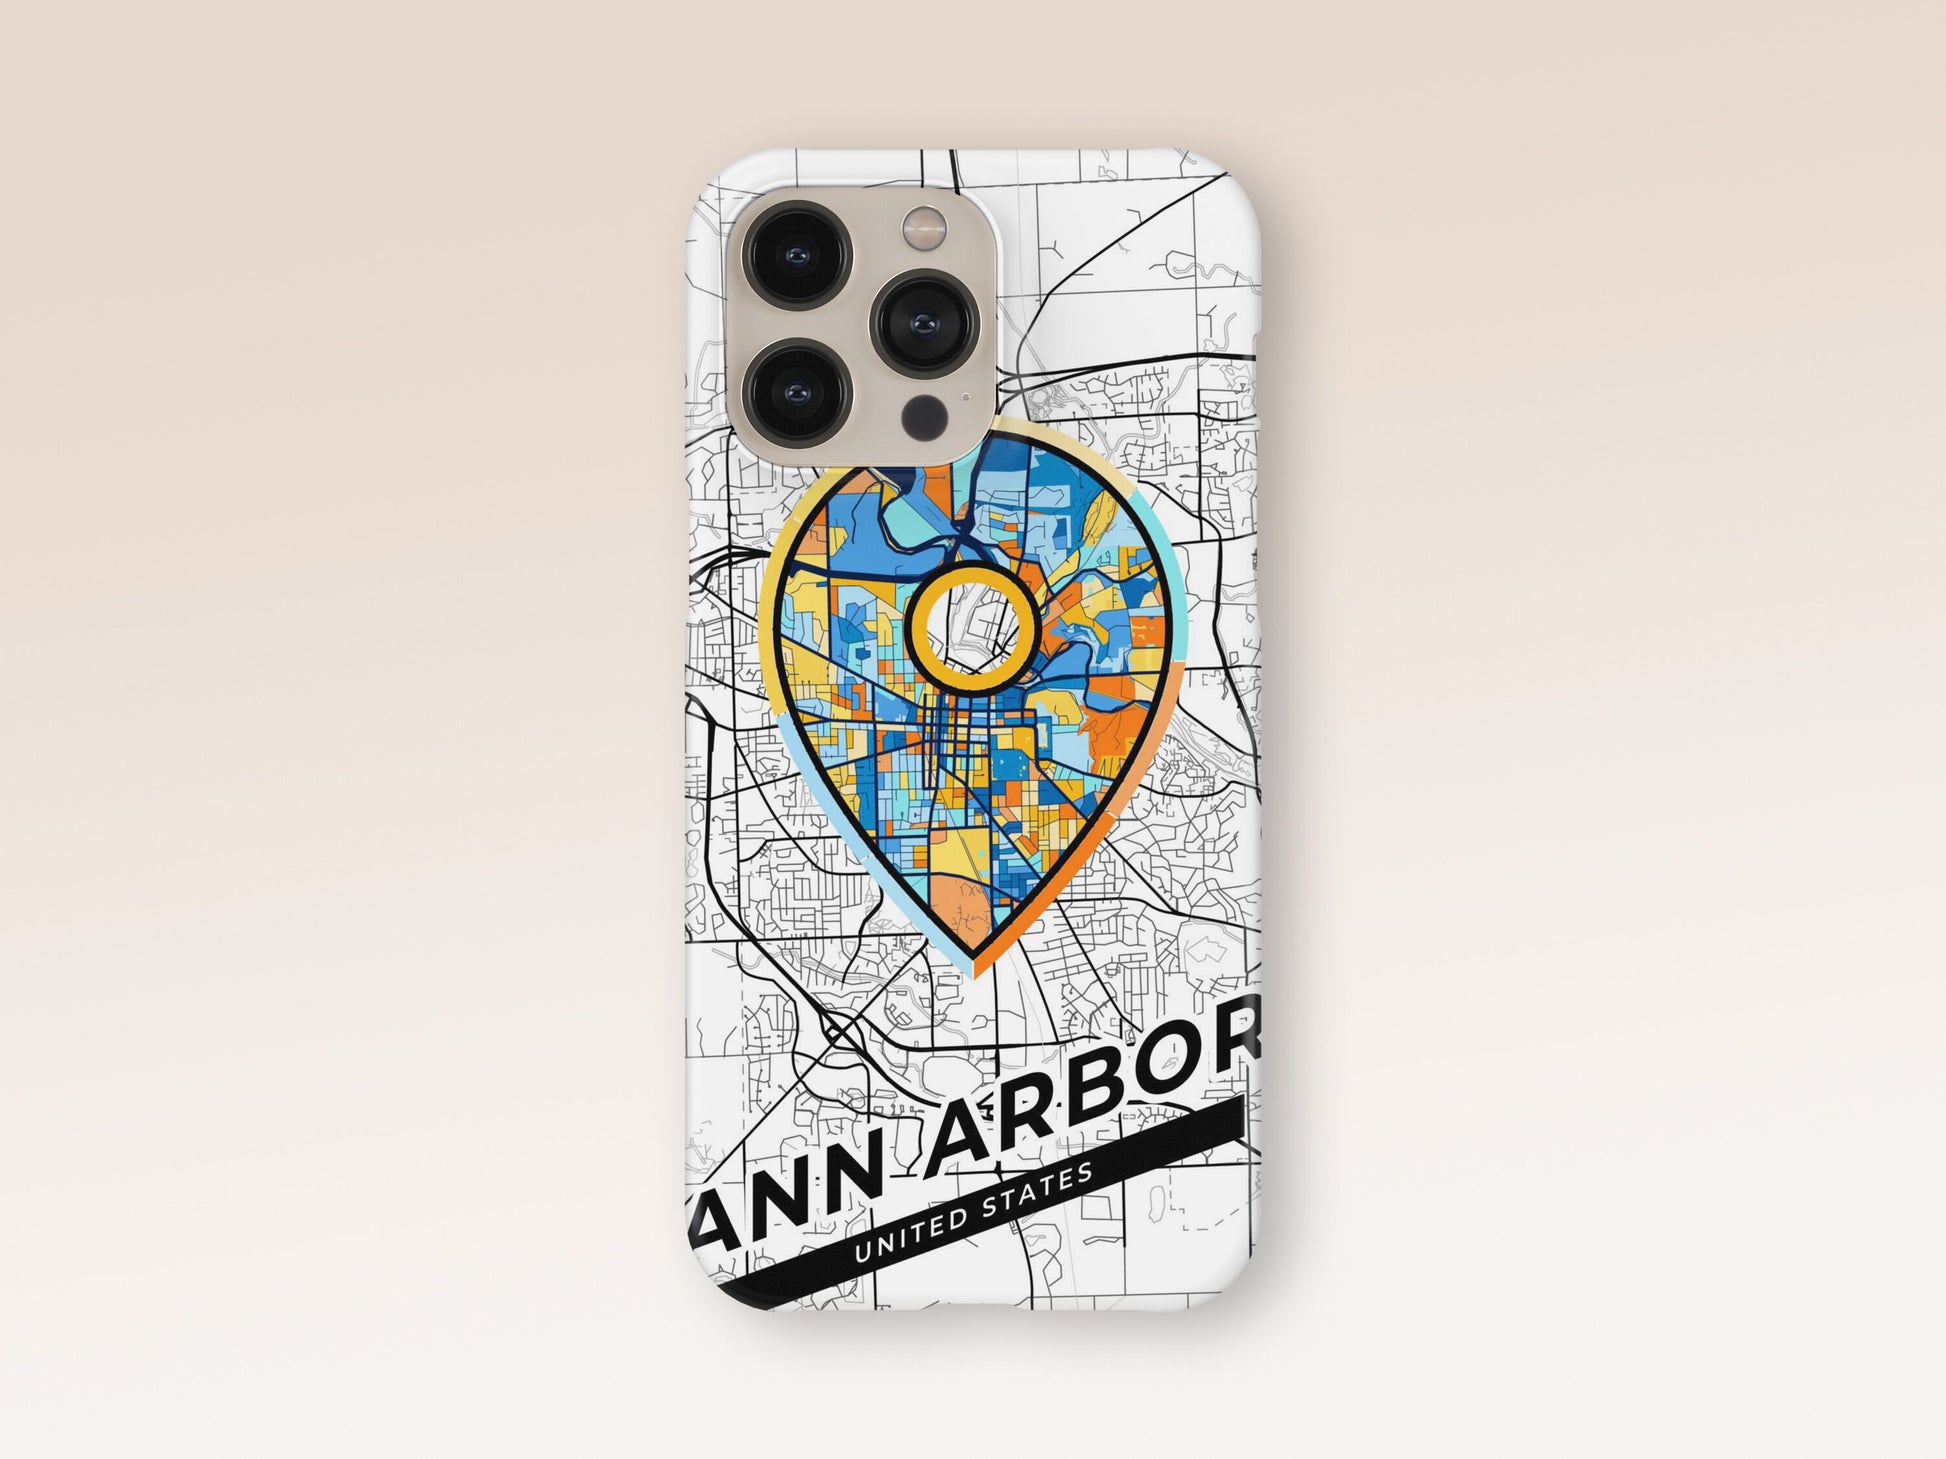 Ann Arbor Michigan slim phone case with colorful icon. Birthday, wedding or housewarming gift. Couple match cases. 1